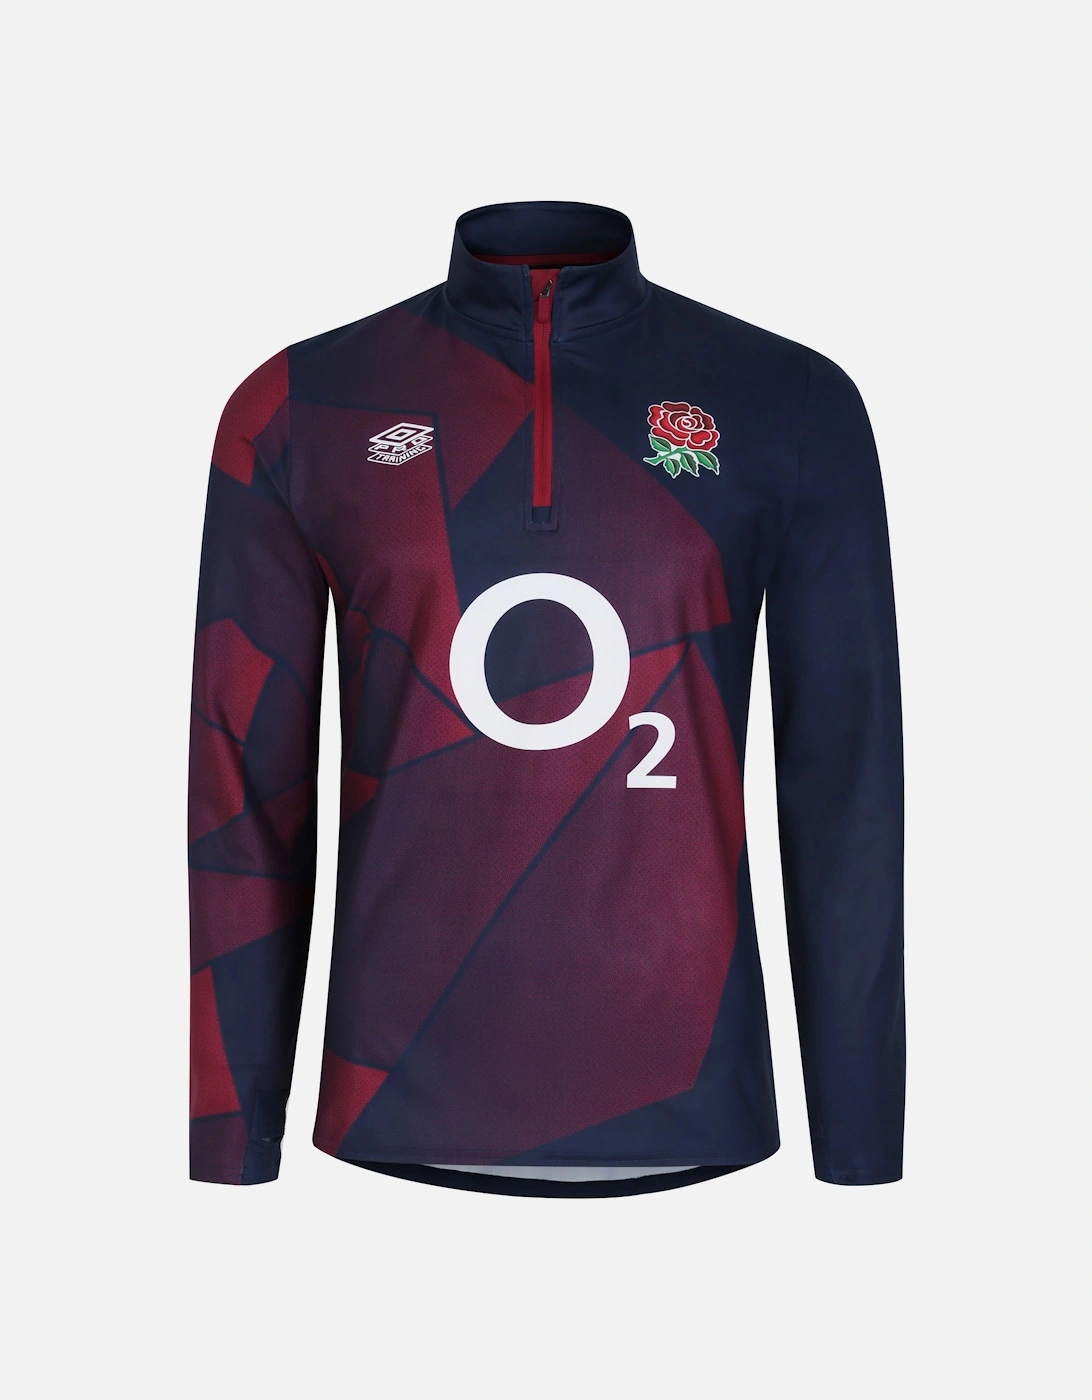 Mens 23/24 England Rugby Warm Up Midlayer, 6 of 5